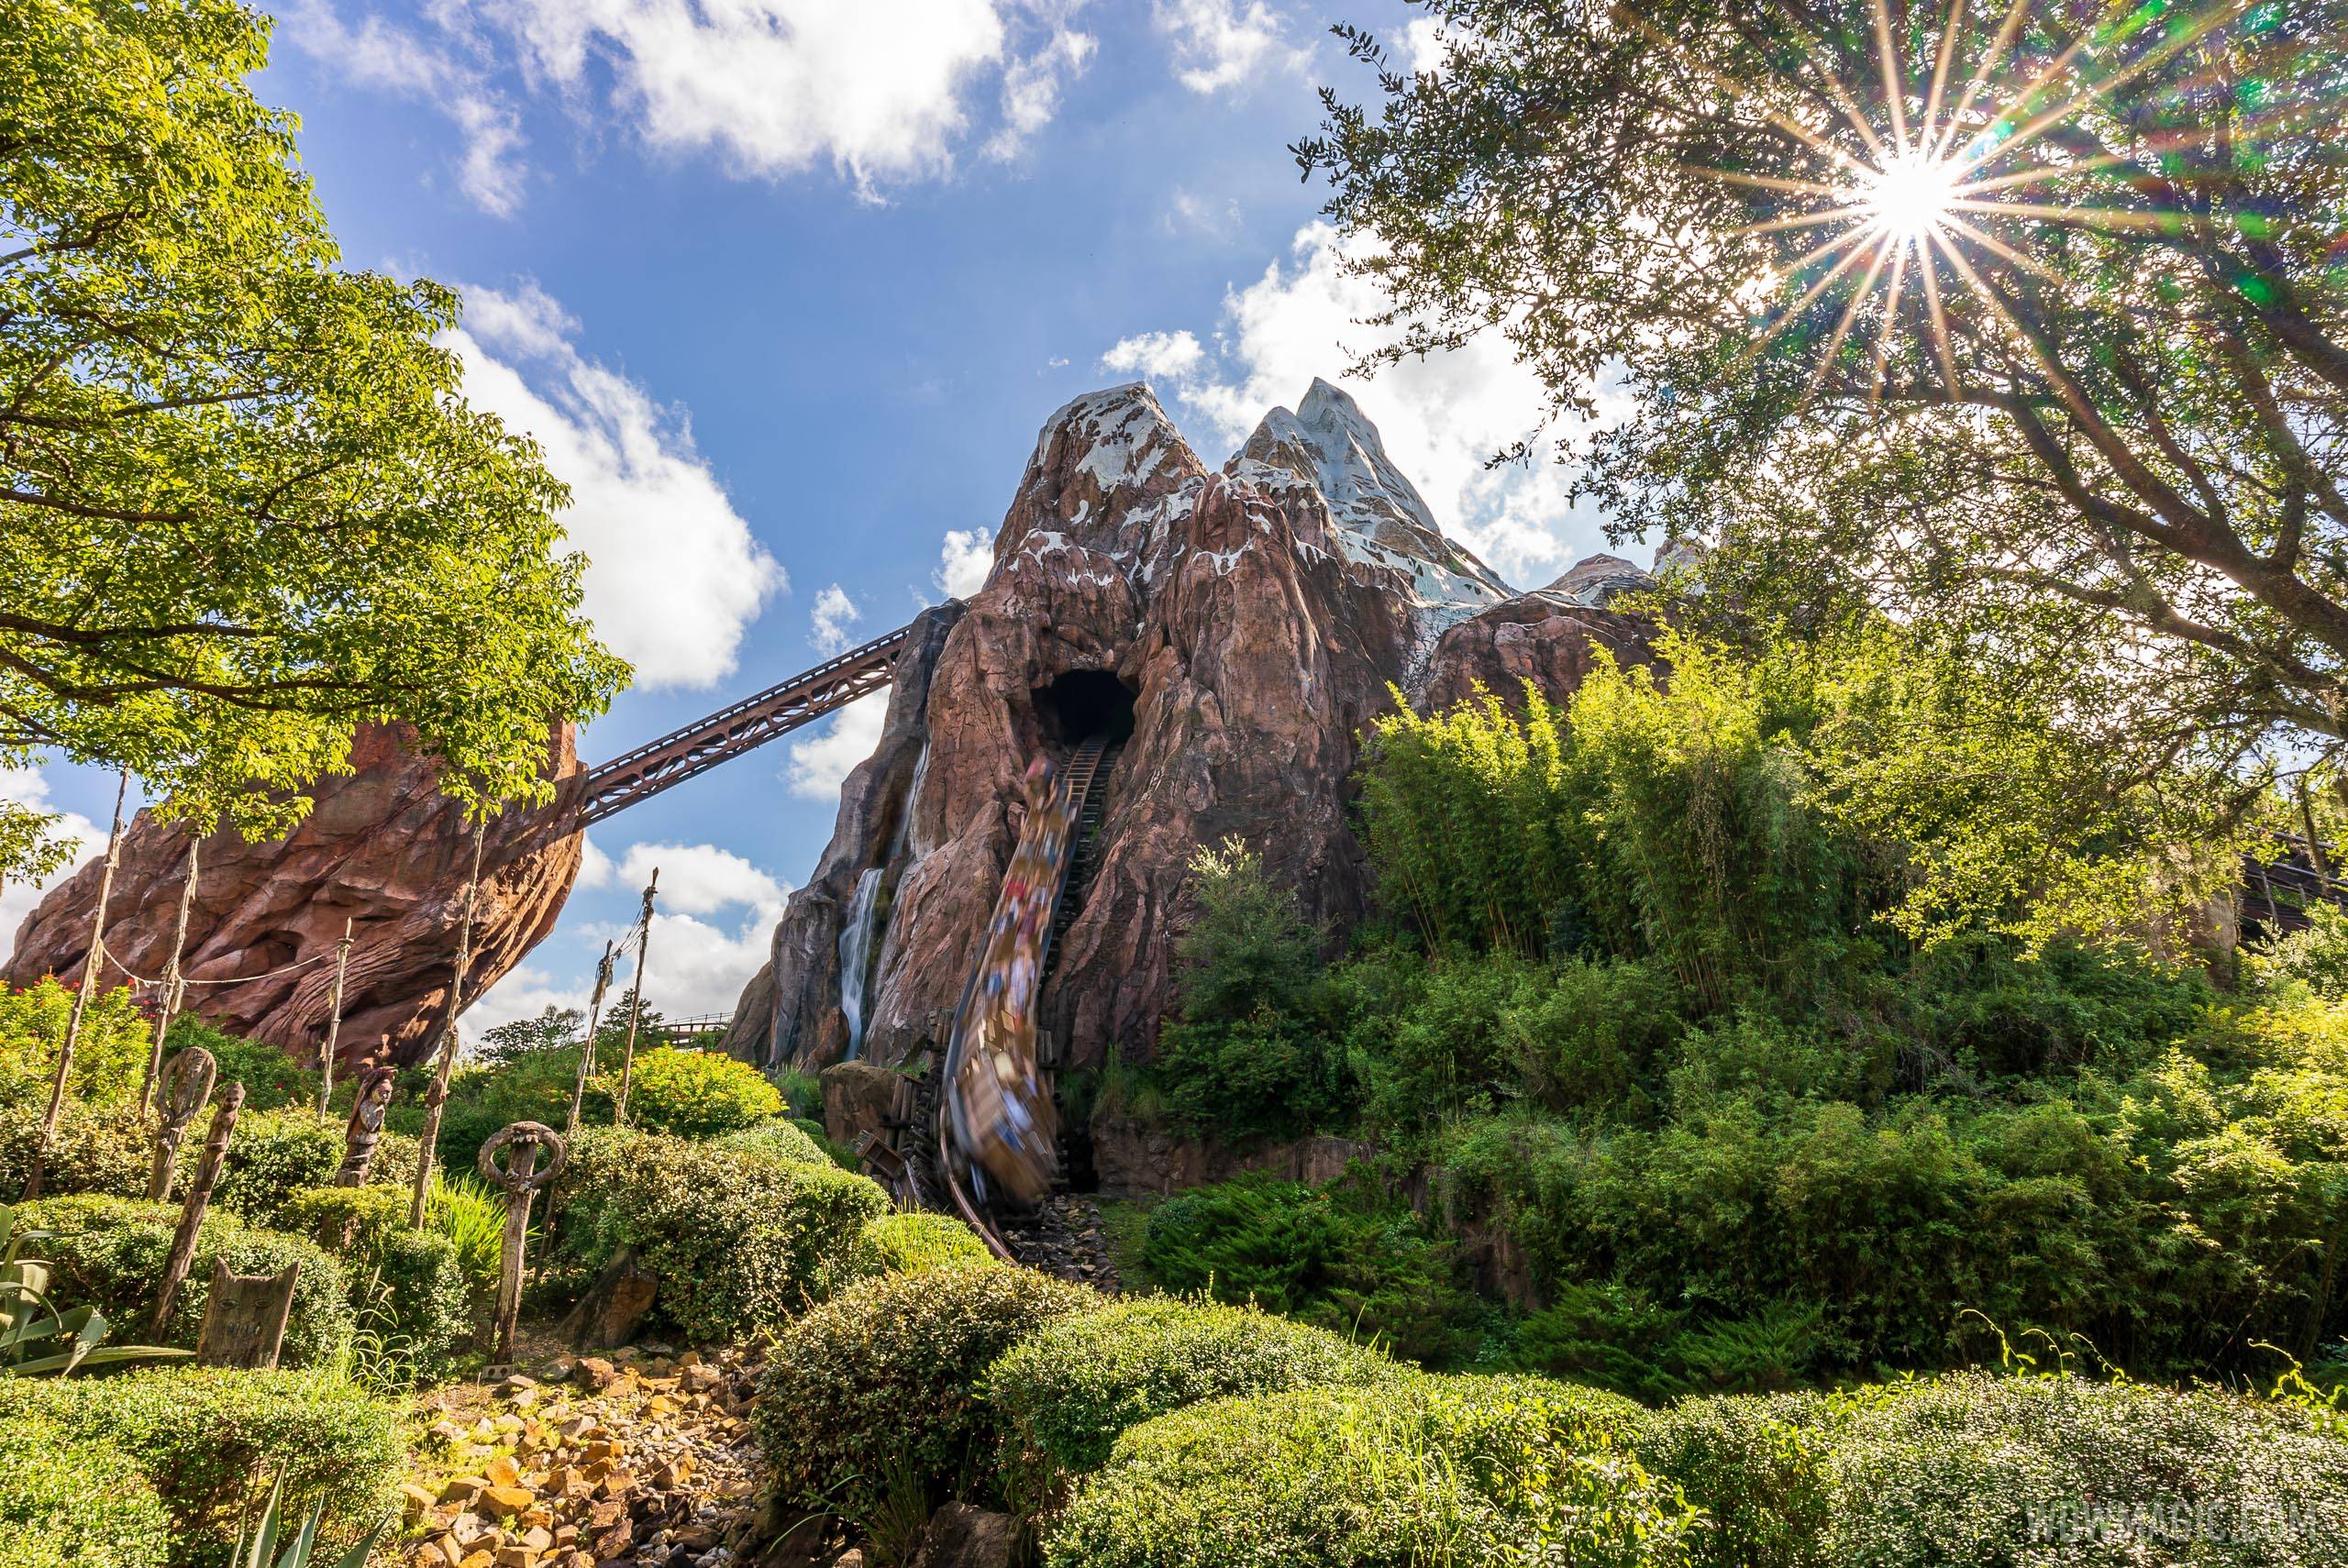 Expedition Everest is now officially open